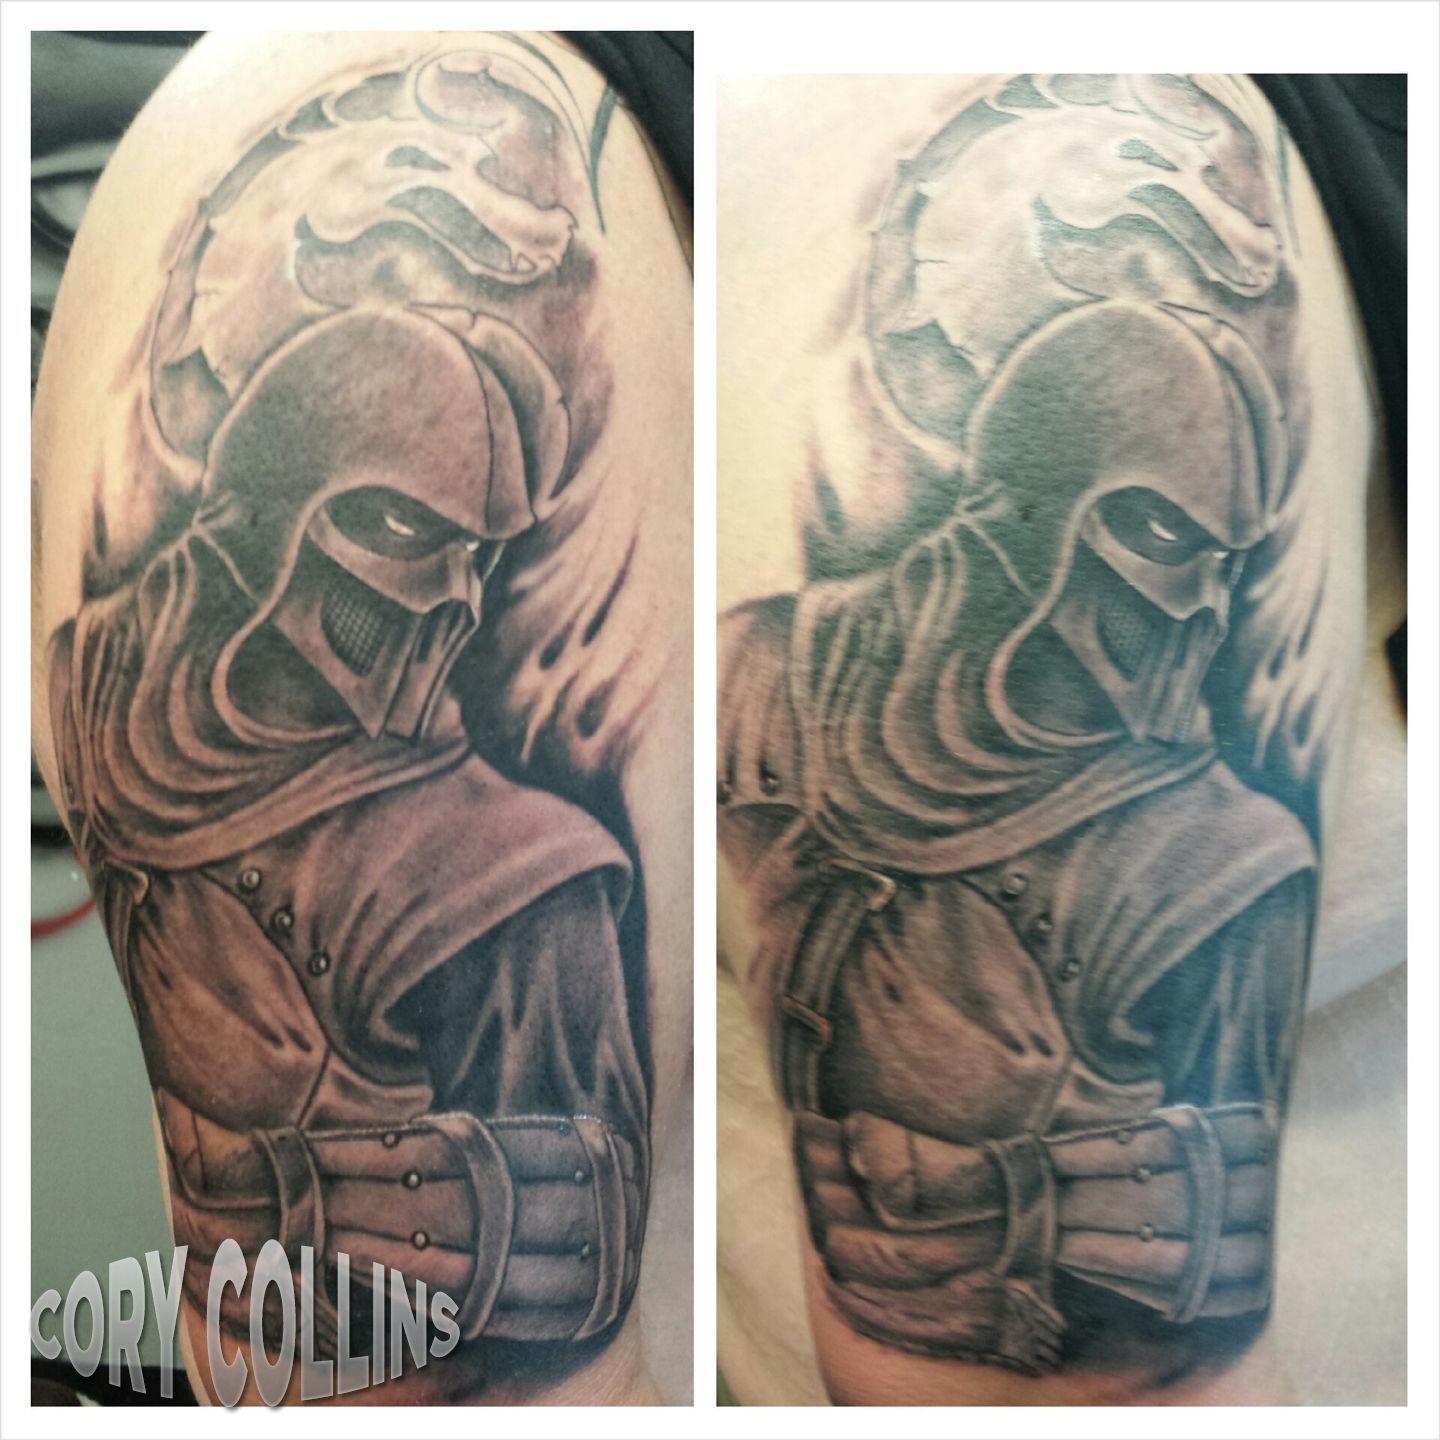 Recovery Aftercare on Twitter Raiden from Mortal Kombat all ready to get  wrapped up in some DermShield Done by Gerardo R Ramos Flores Insta  geraldramosart recovery recoveryaftercare tattooaftercare  videogametattoos mortalkombat raiden 